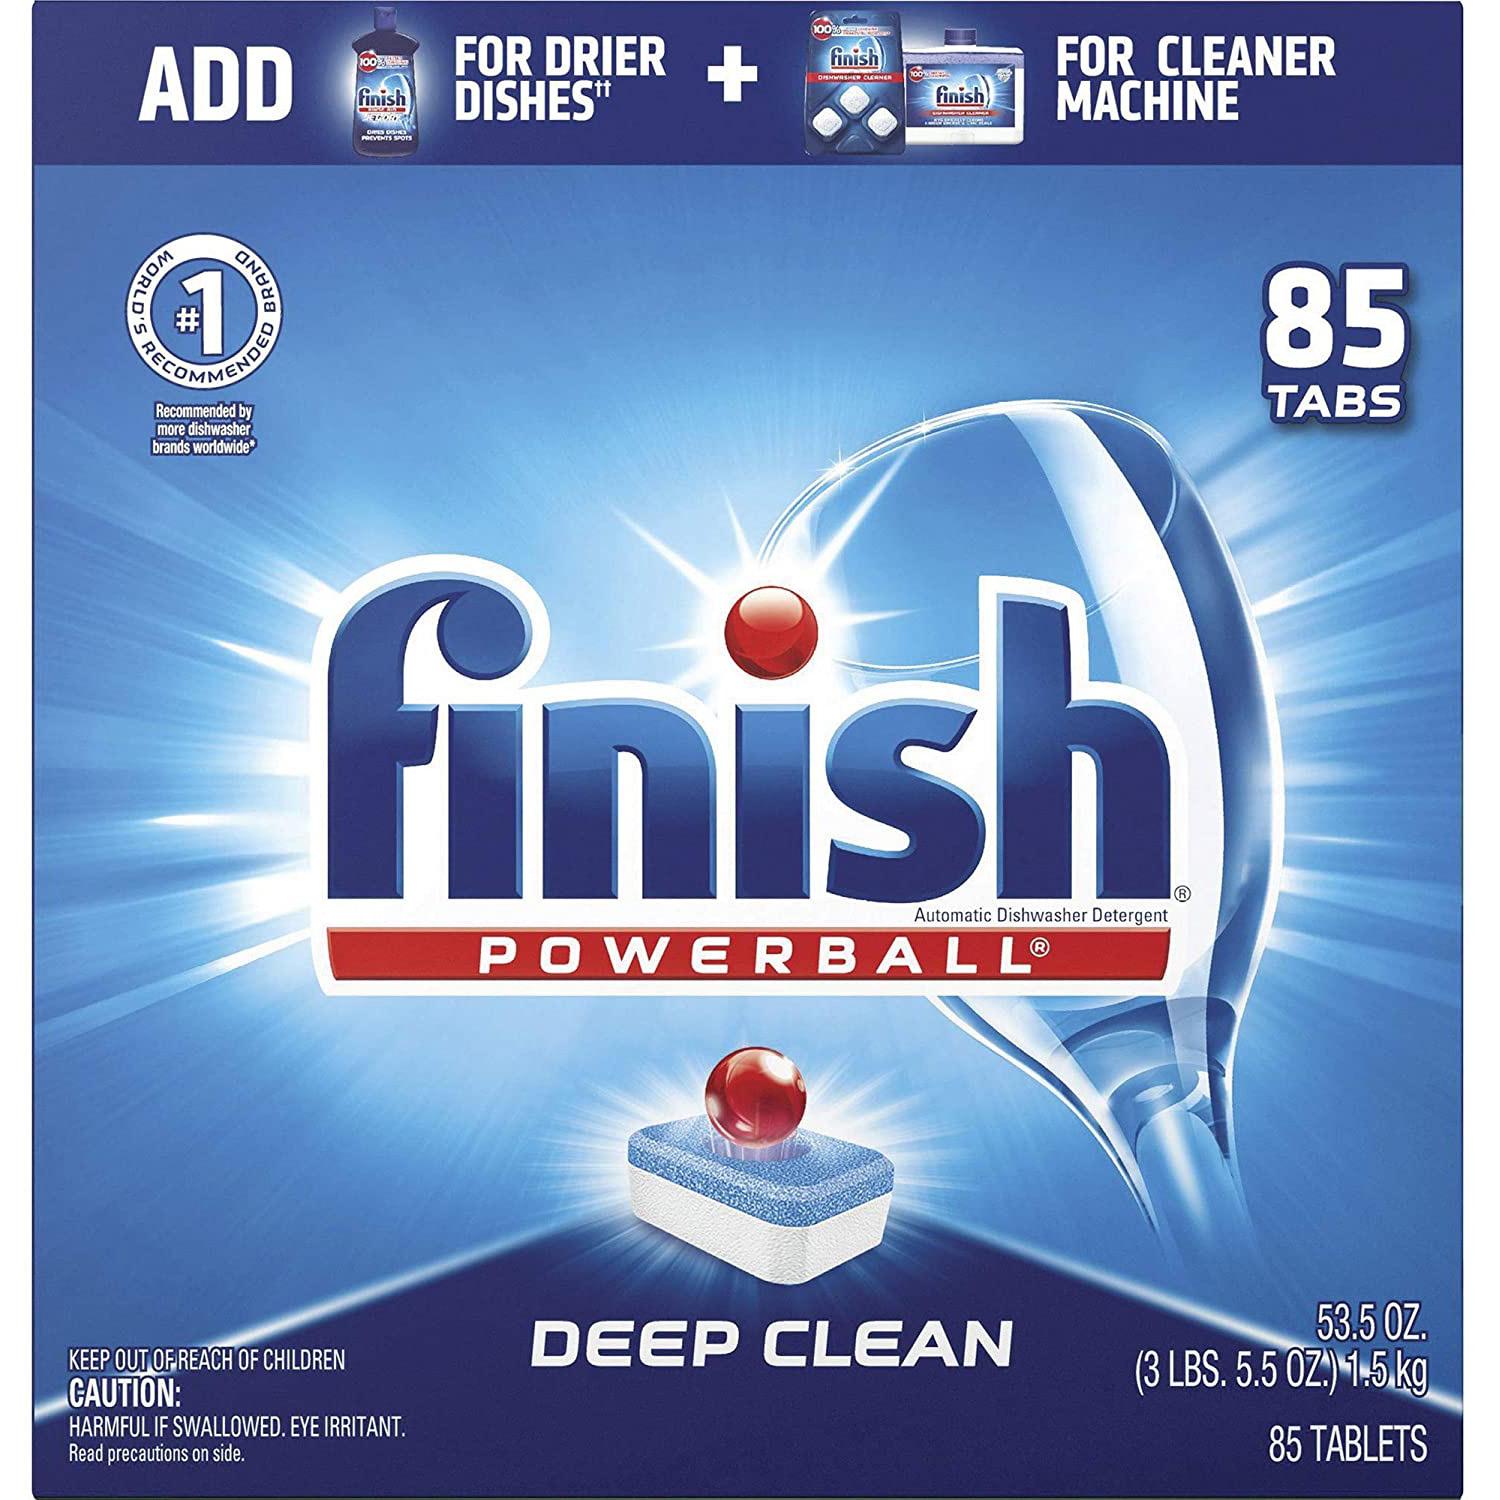 85 Finish Powerball Dishwasher Detergent Tablets for $9.59 Shipped